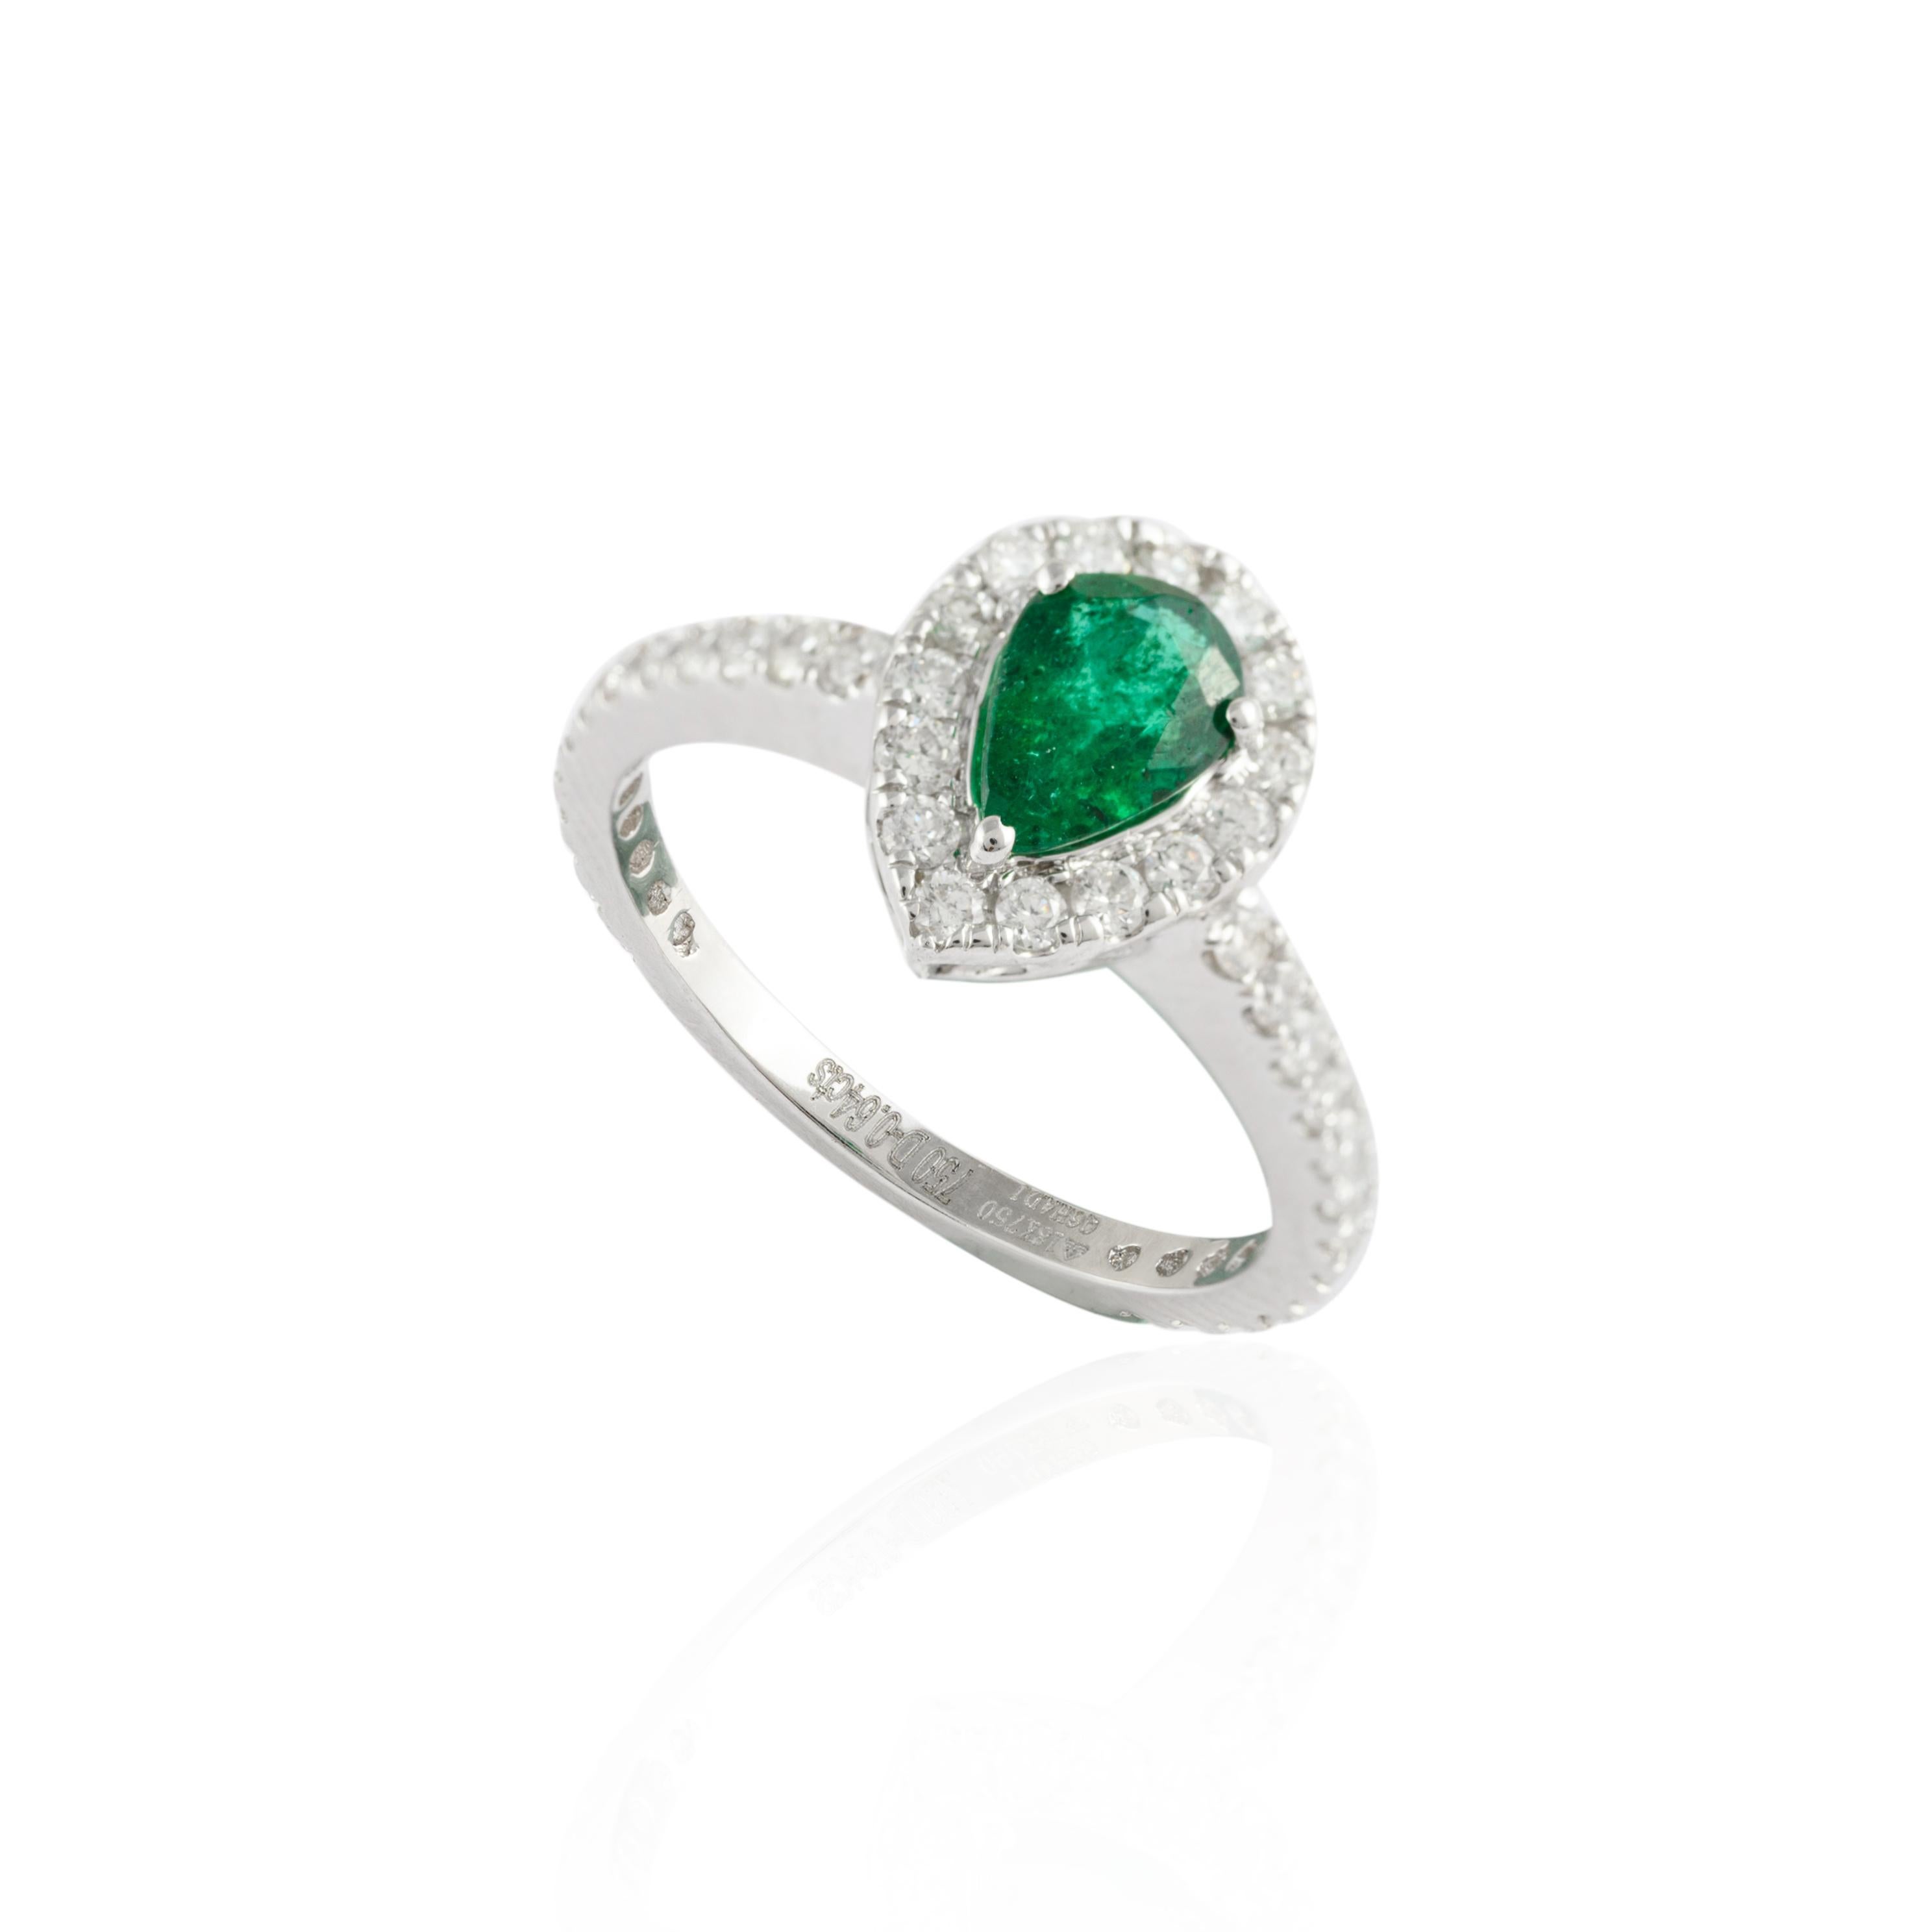 For Sale:  Exclusive 18k Solid White Gold Halo Diamond Natural Pear Cut Emerald Ring 5